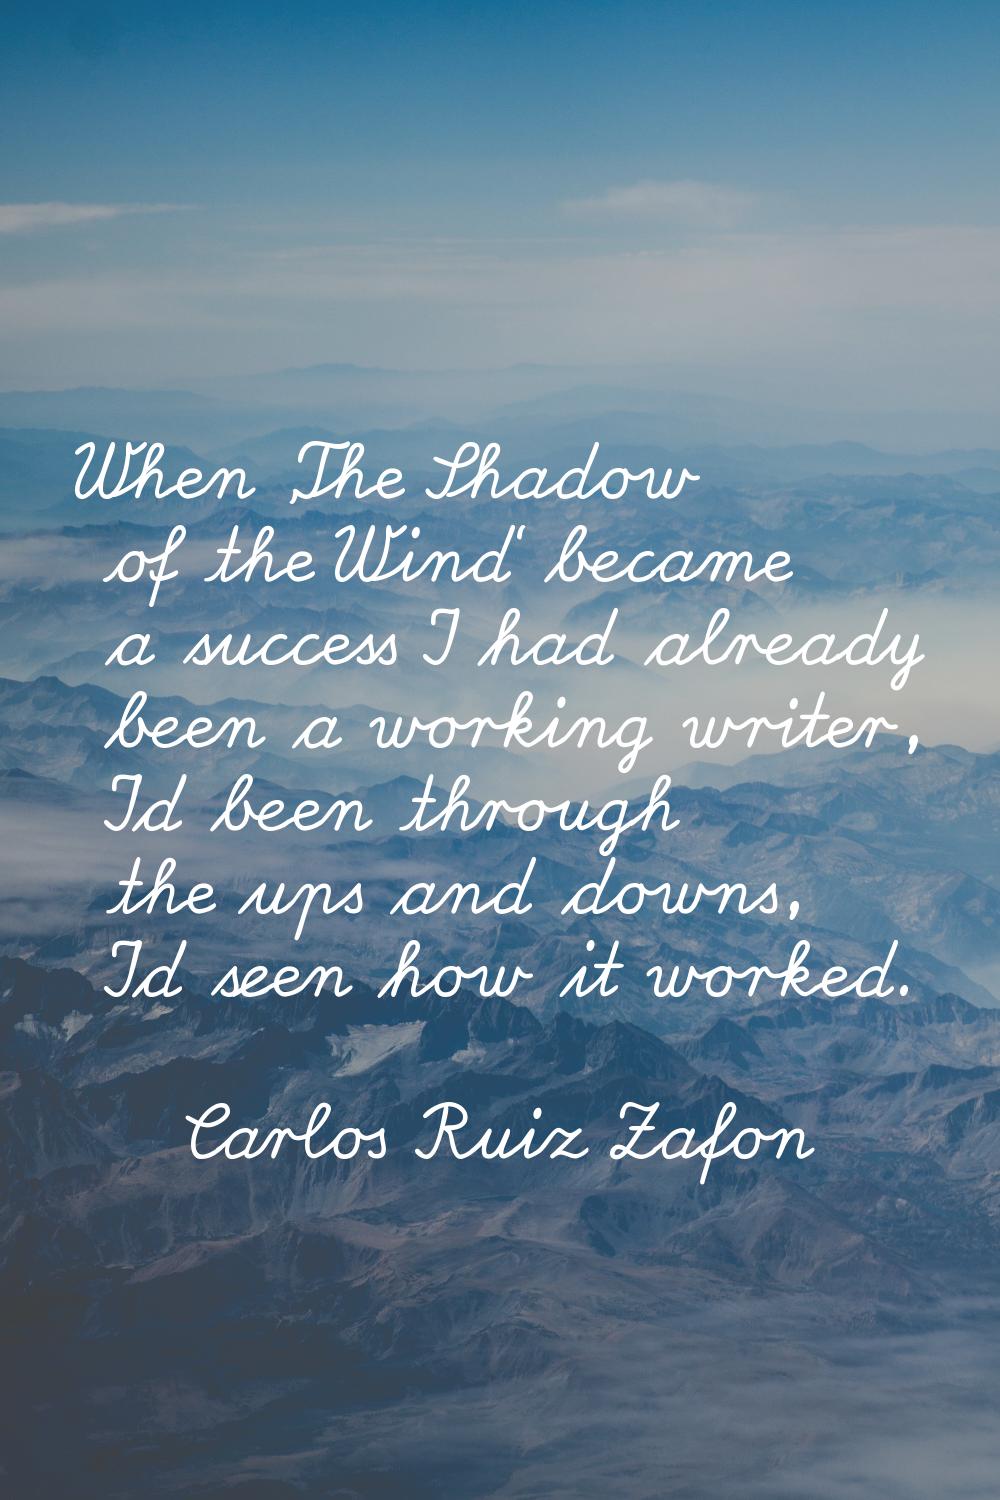 When 'The Shadow of the Wind' became a success I had already been a working writer, I'd been throug